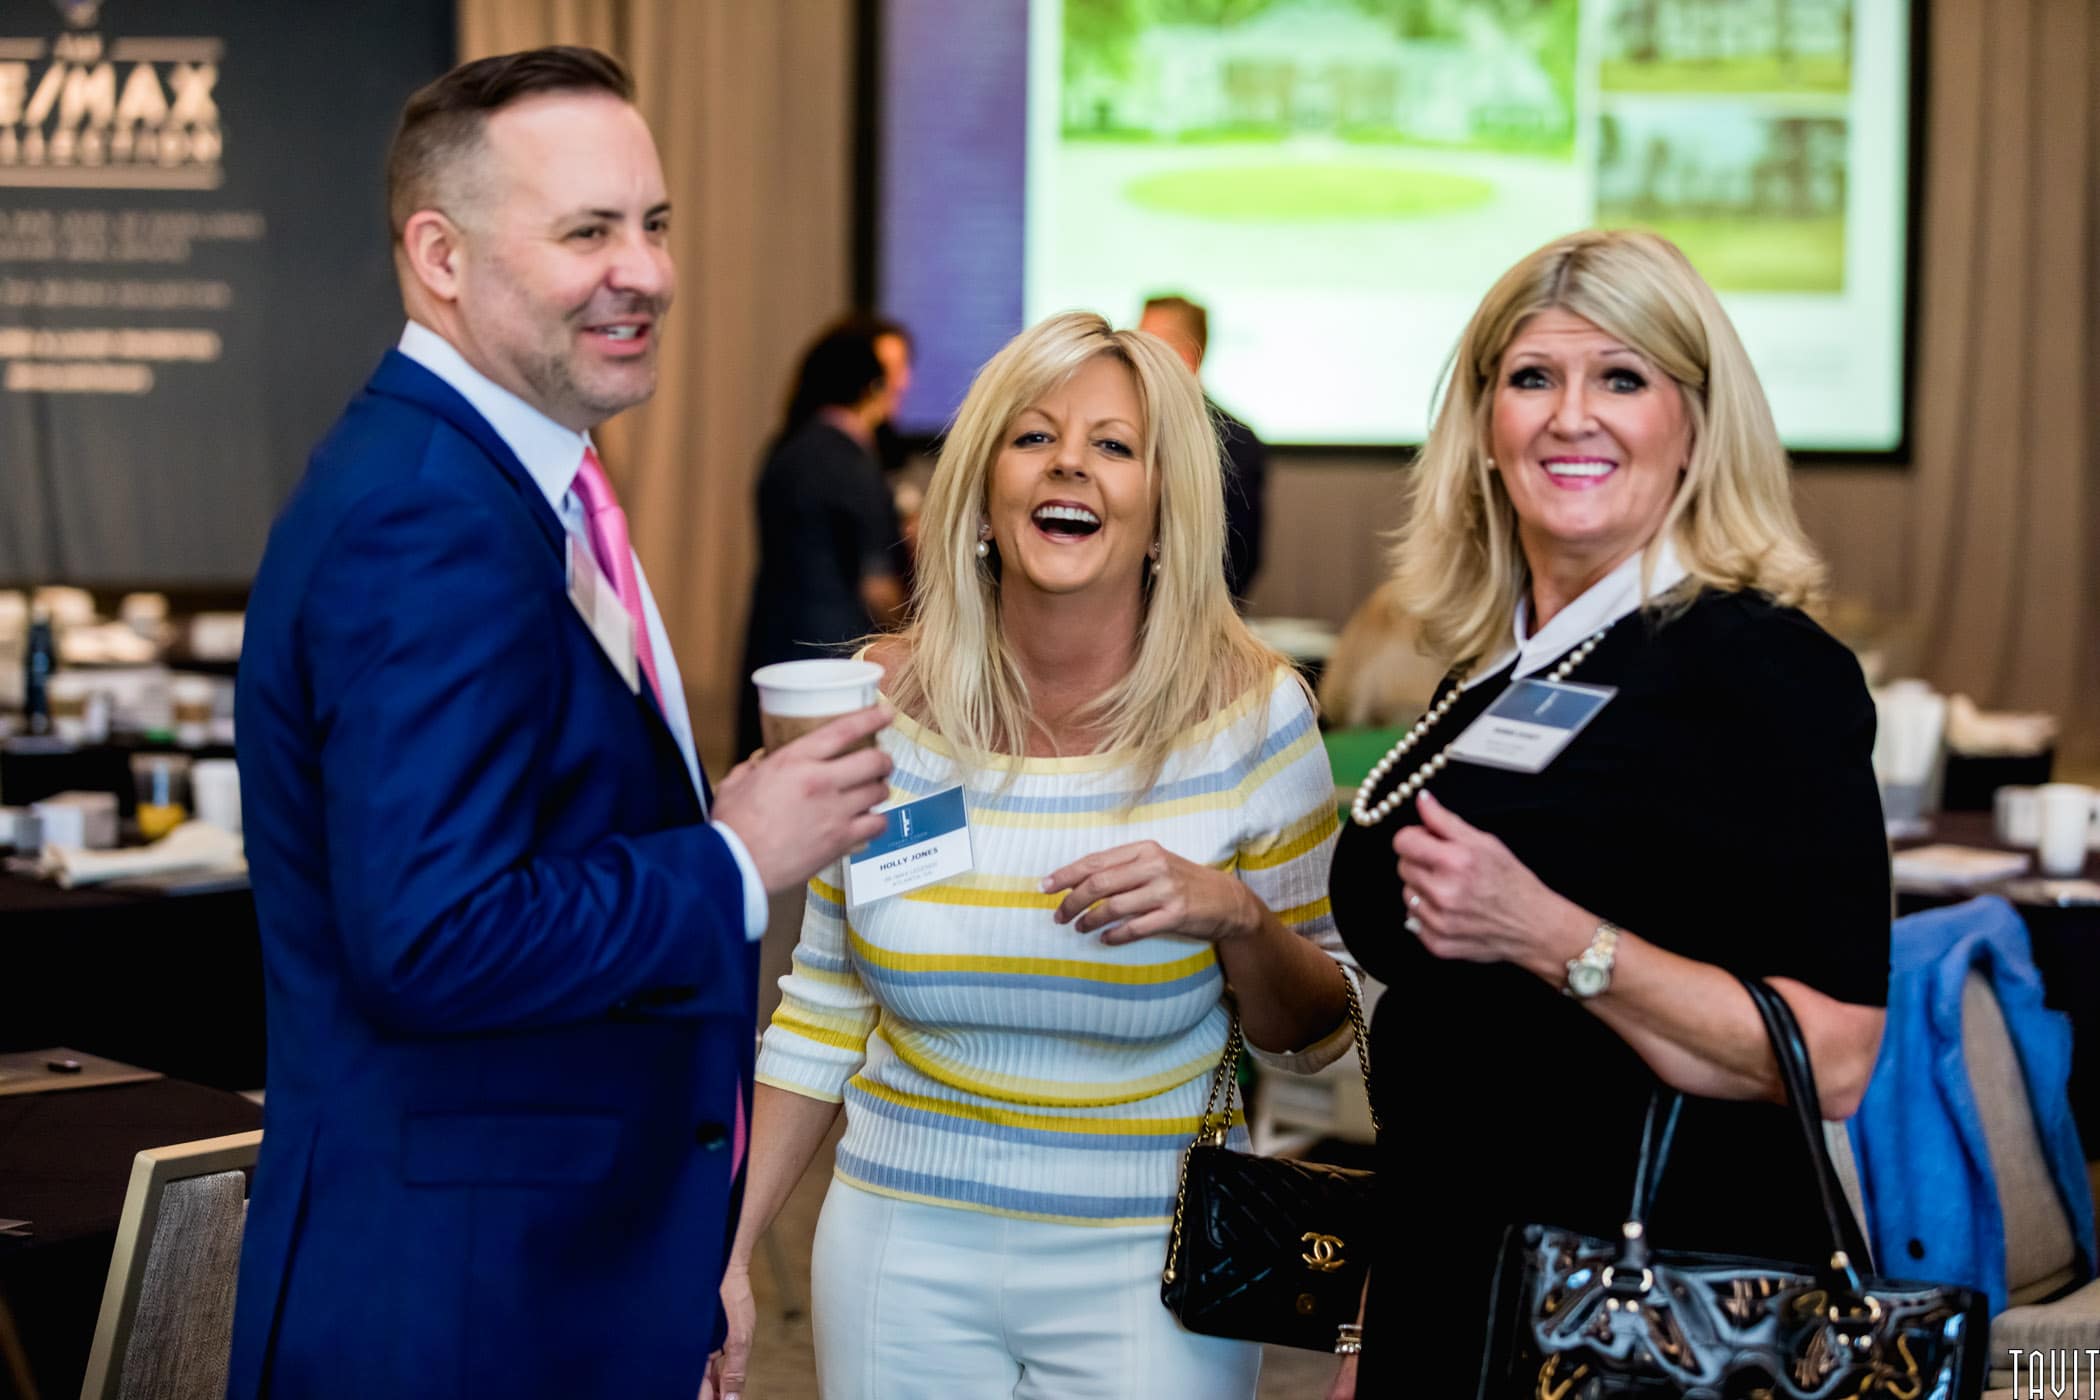 People laughing at business event